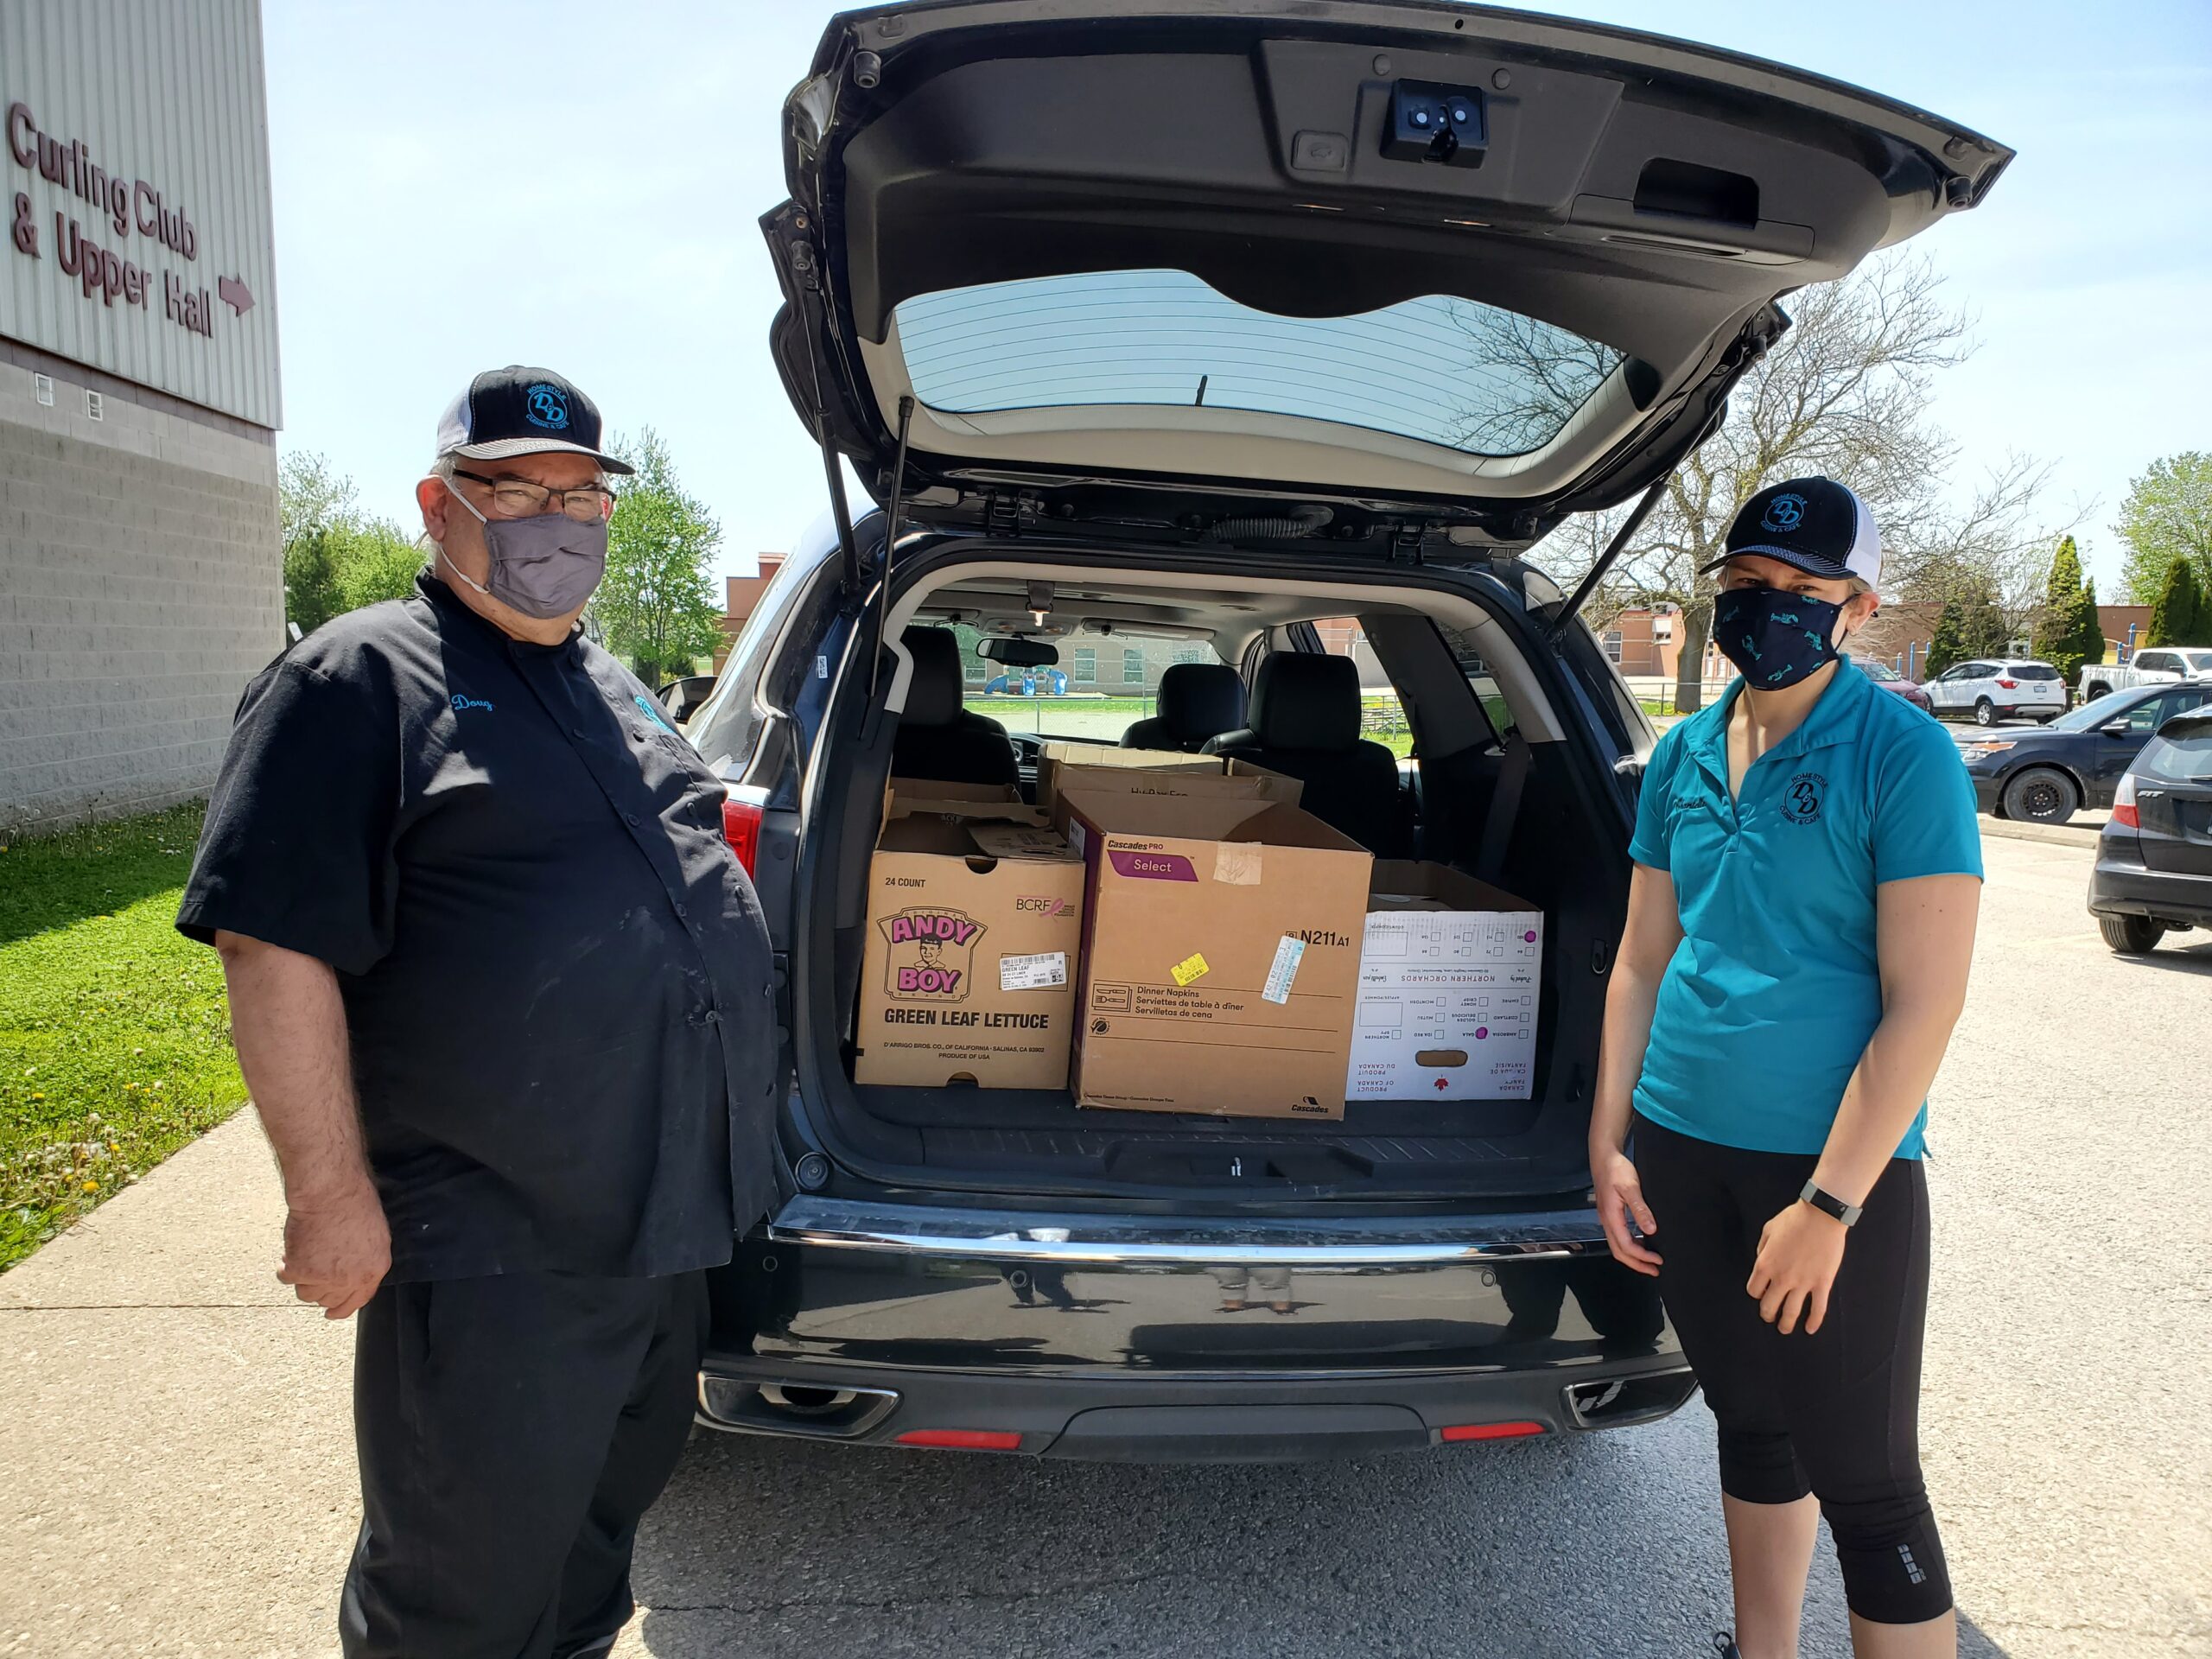 Local community members donating lunches for volunteers